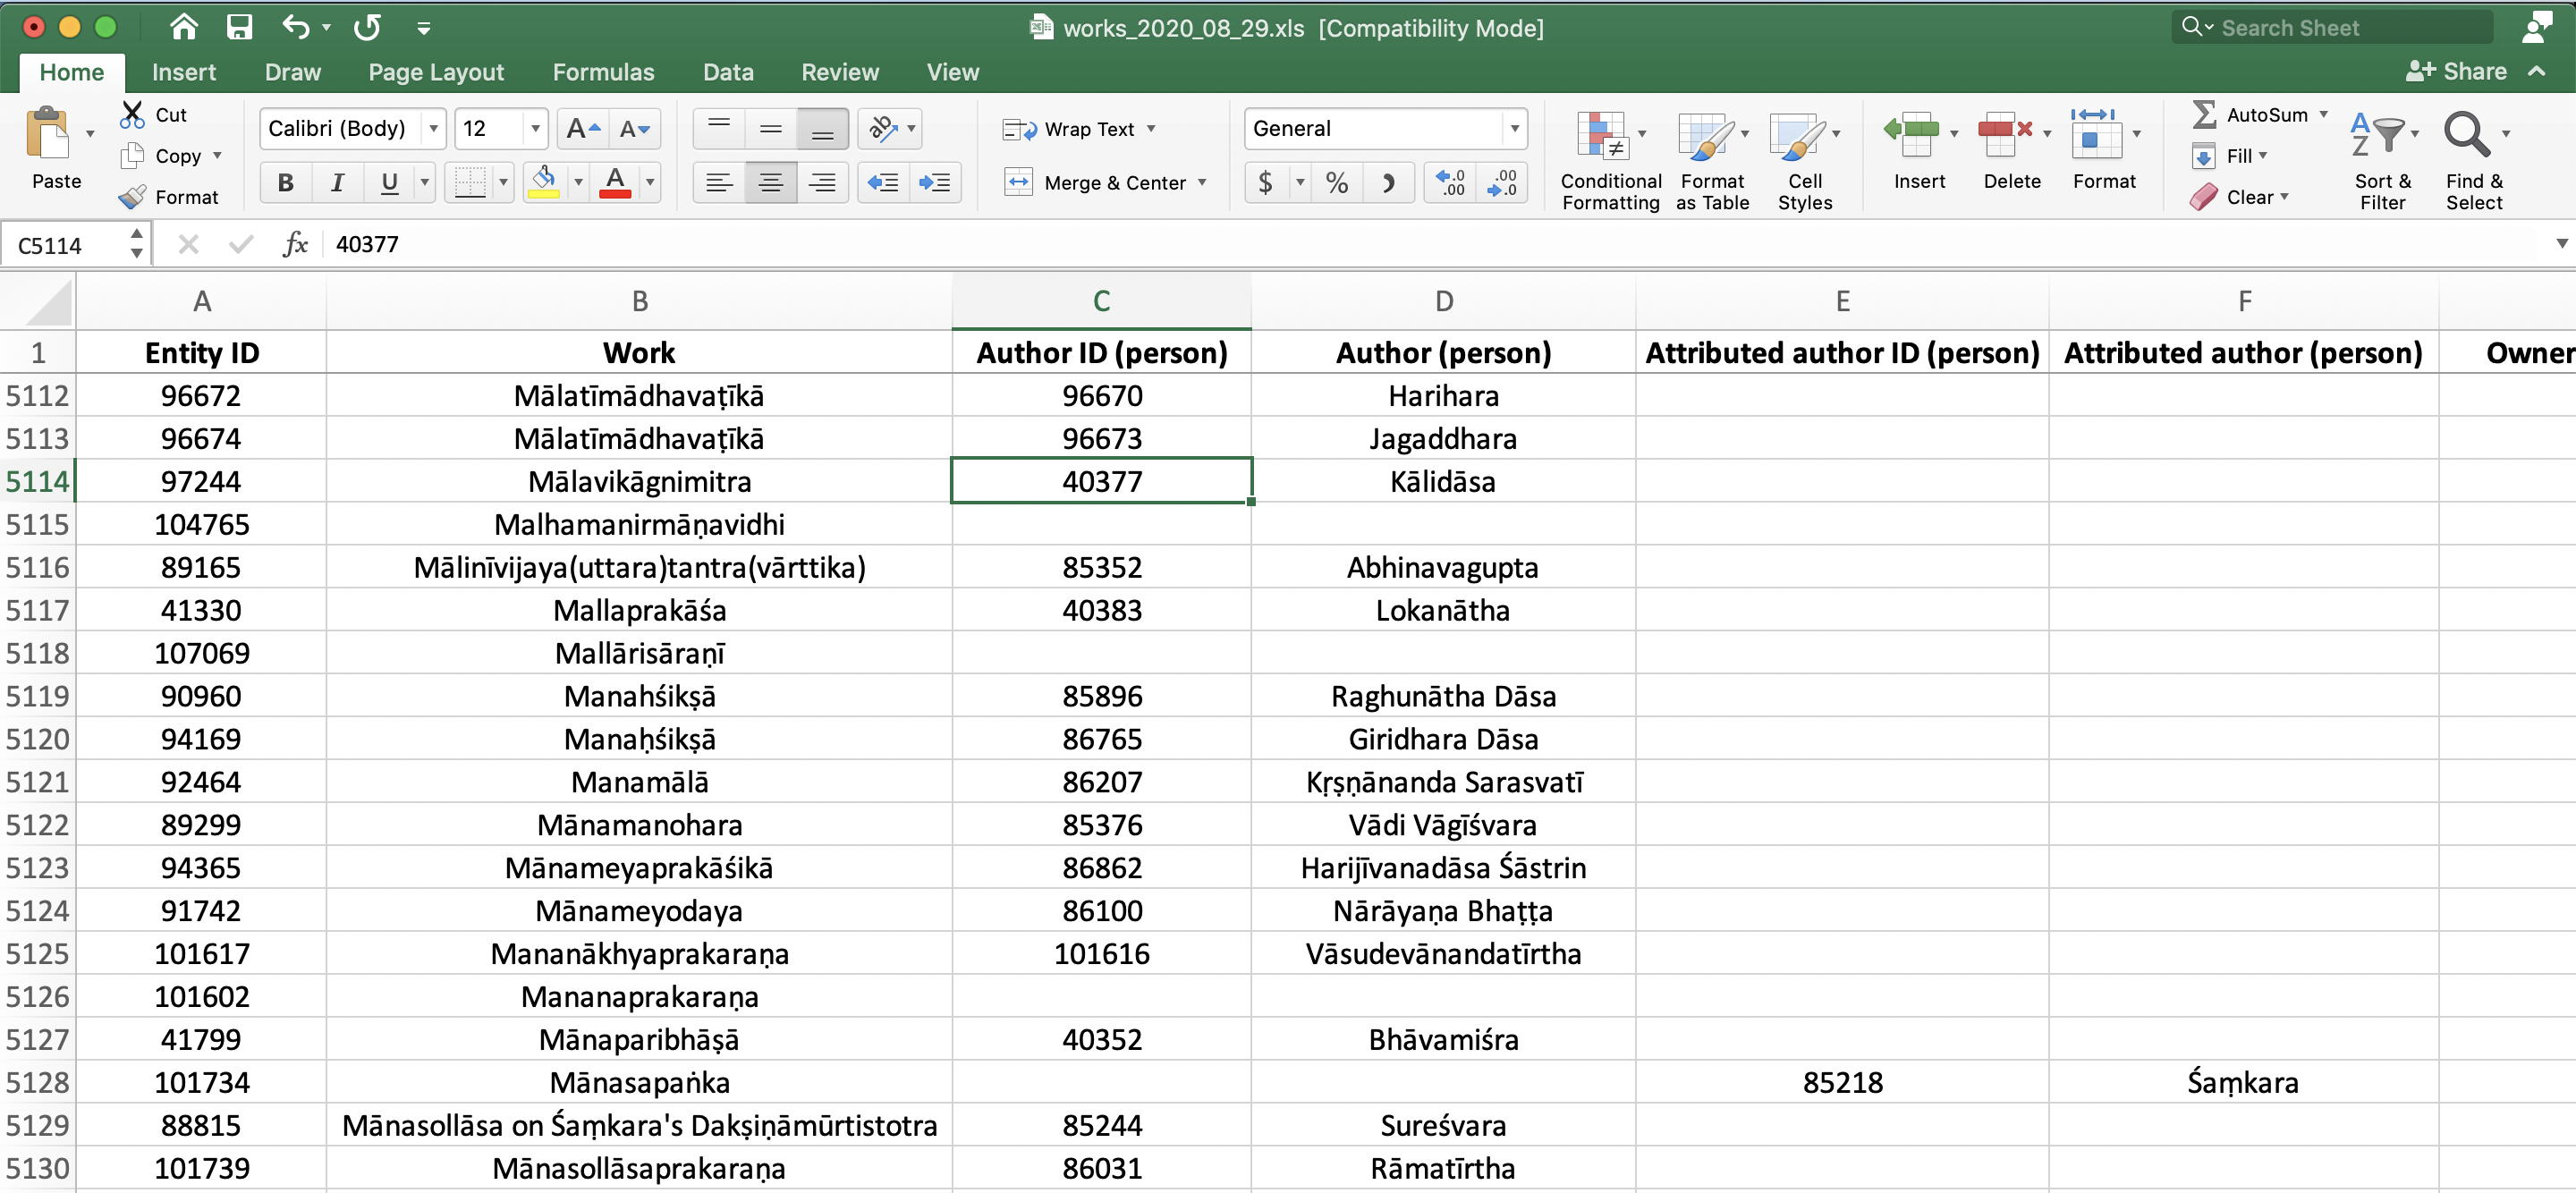 works_2020_08_29_spreadsheet.png